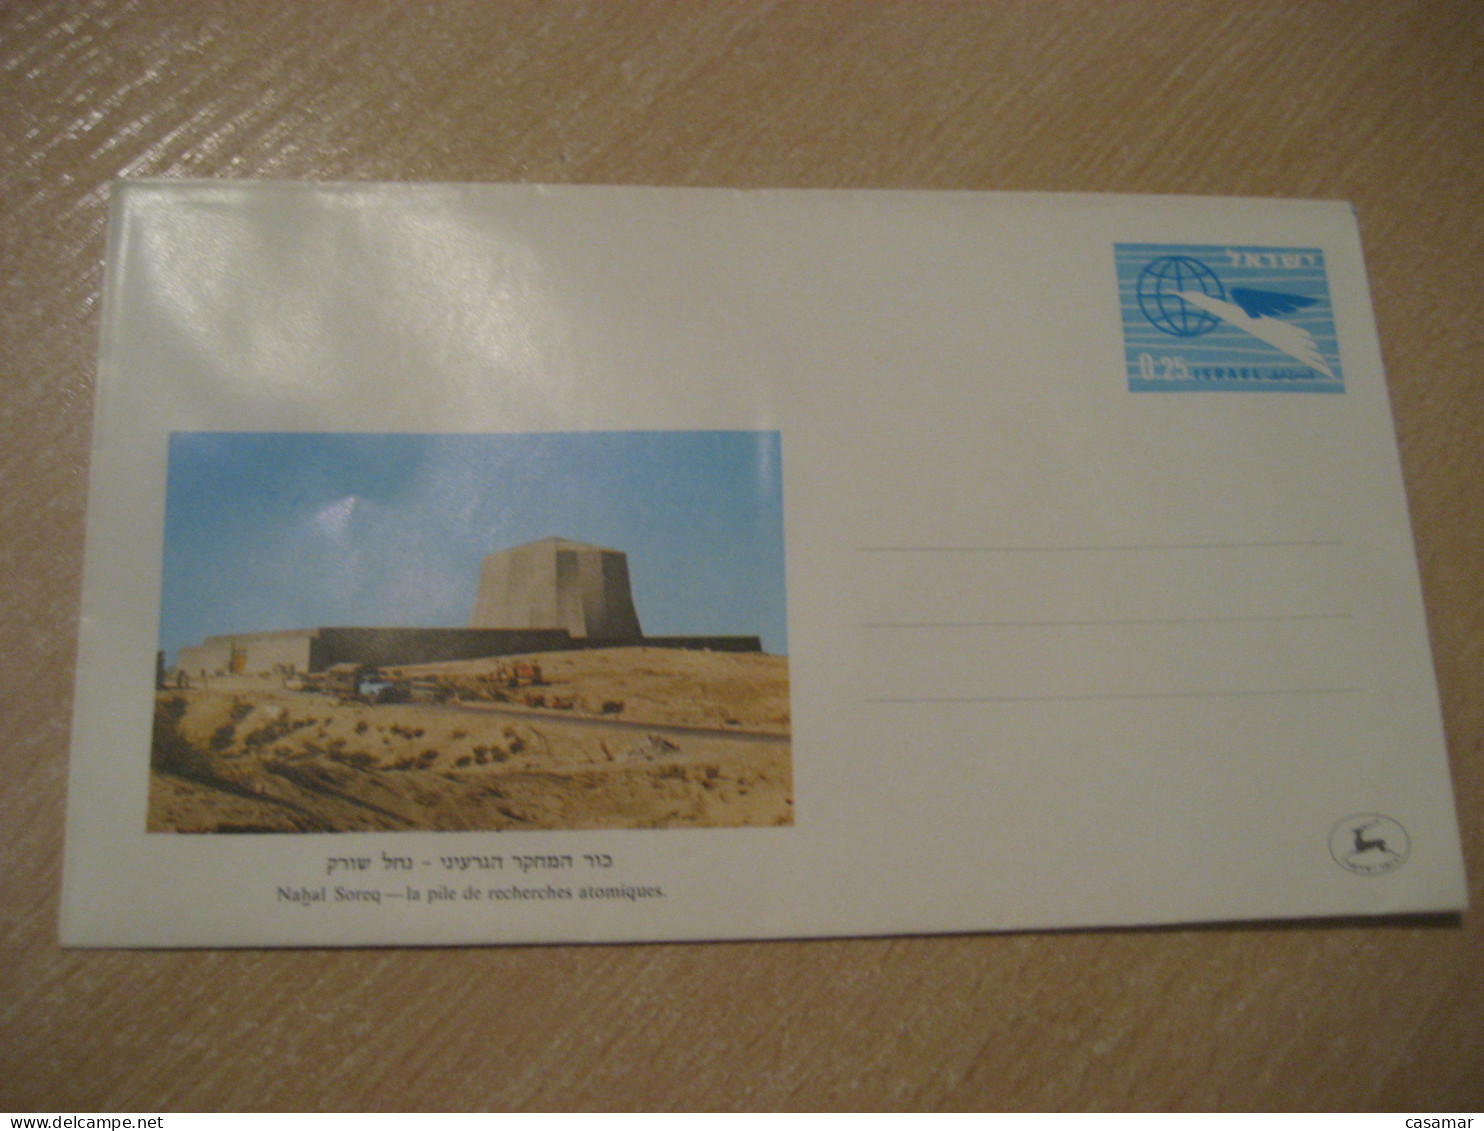 NAHAL SOREQ La Pile De Recherches Atomiques The Atomic Research Stack Physics Postal Stationery Cover ISRAEL Physique - Fisica